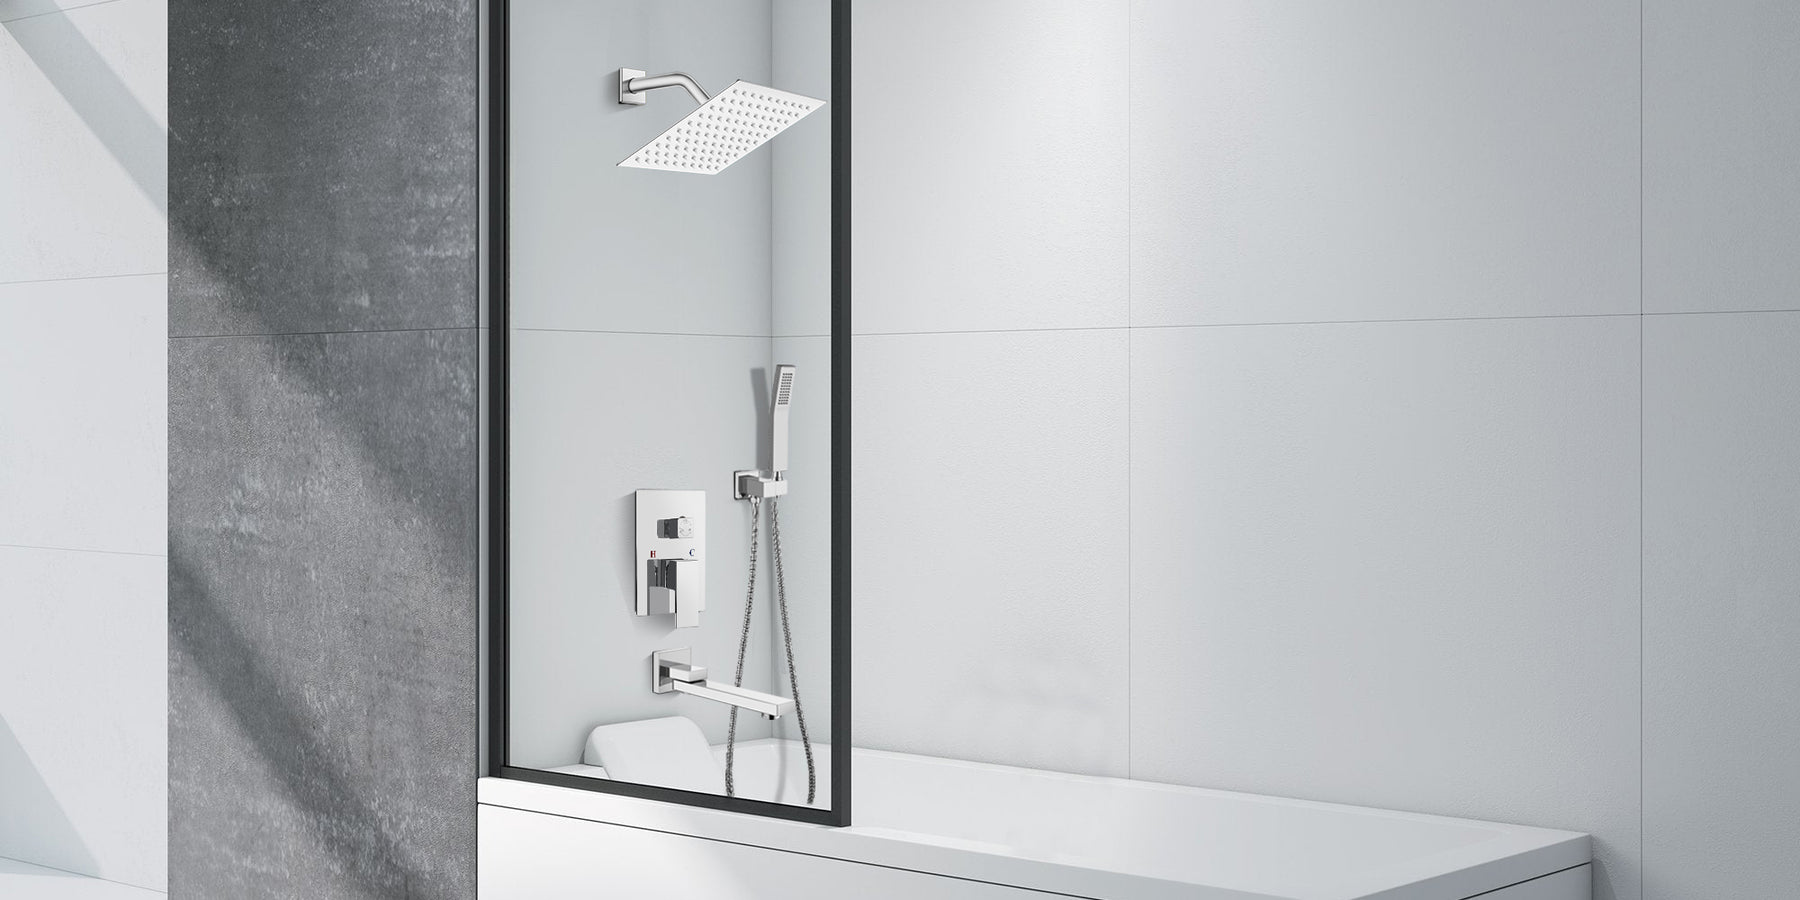 gotonovo Bathroom Shower Faucet Set Wall Mount Triple Function Shower System with Tub Spout Chrome Polished High Pressure Square 8" Rain Showerhead Hand Shower Rough-In Valve